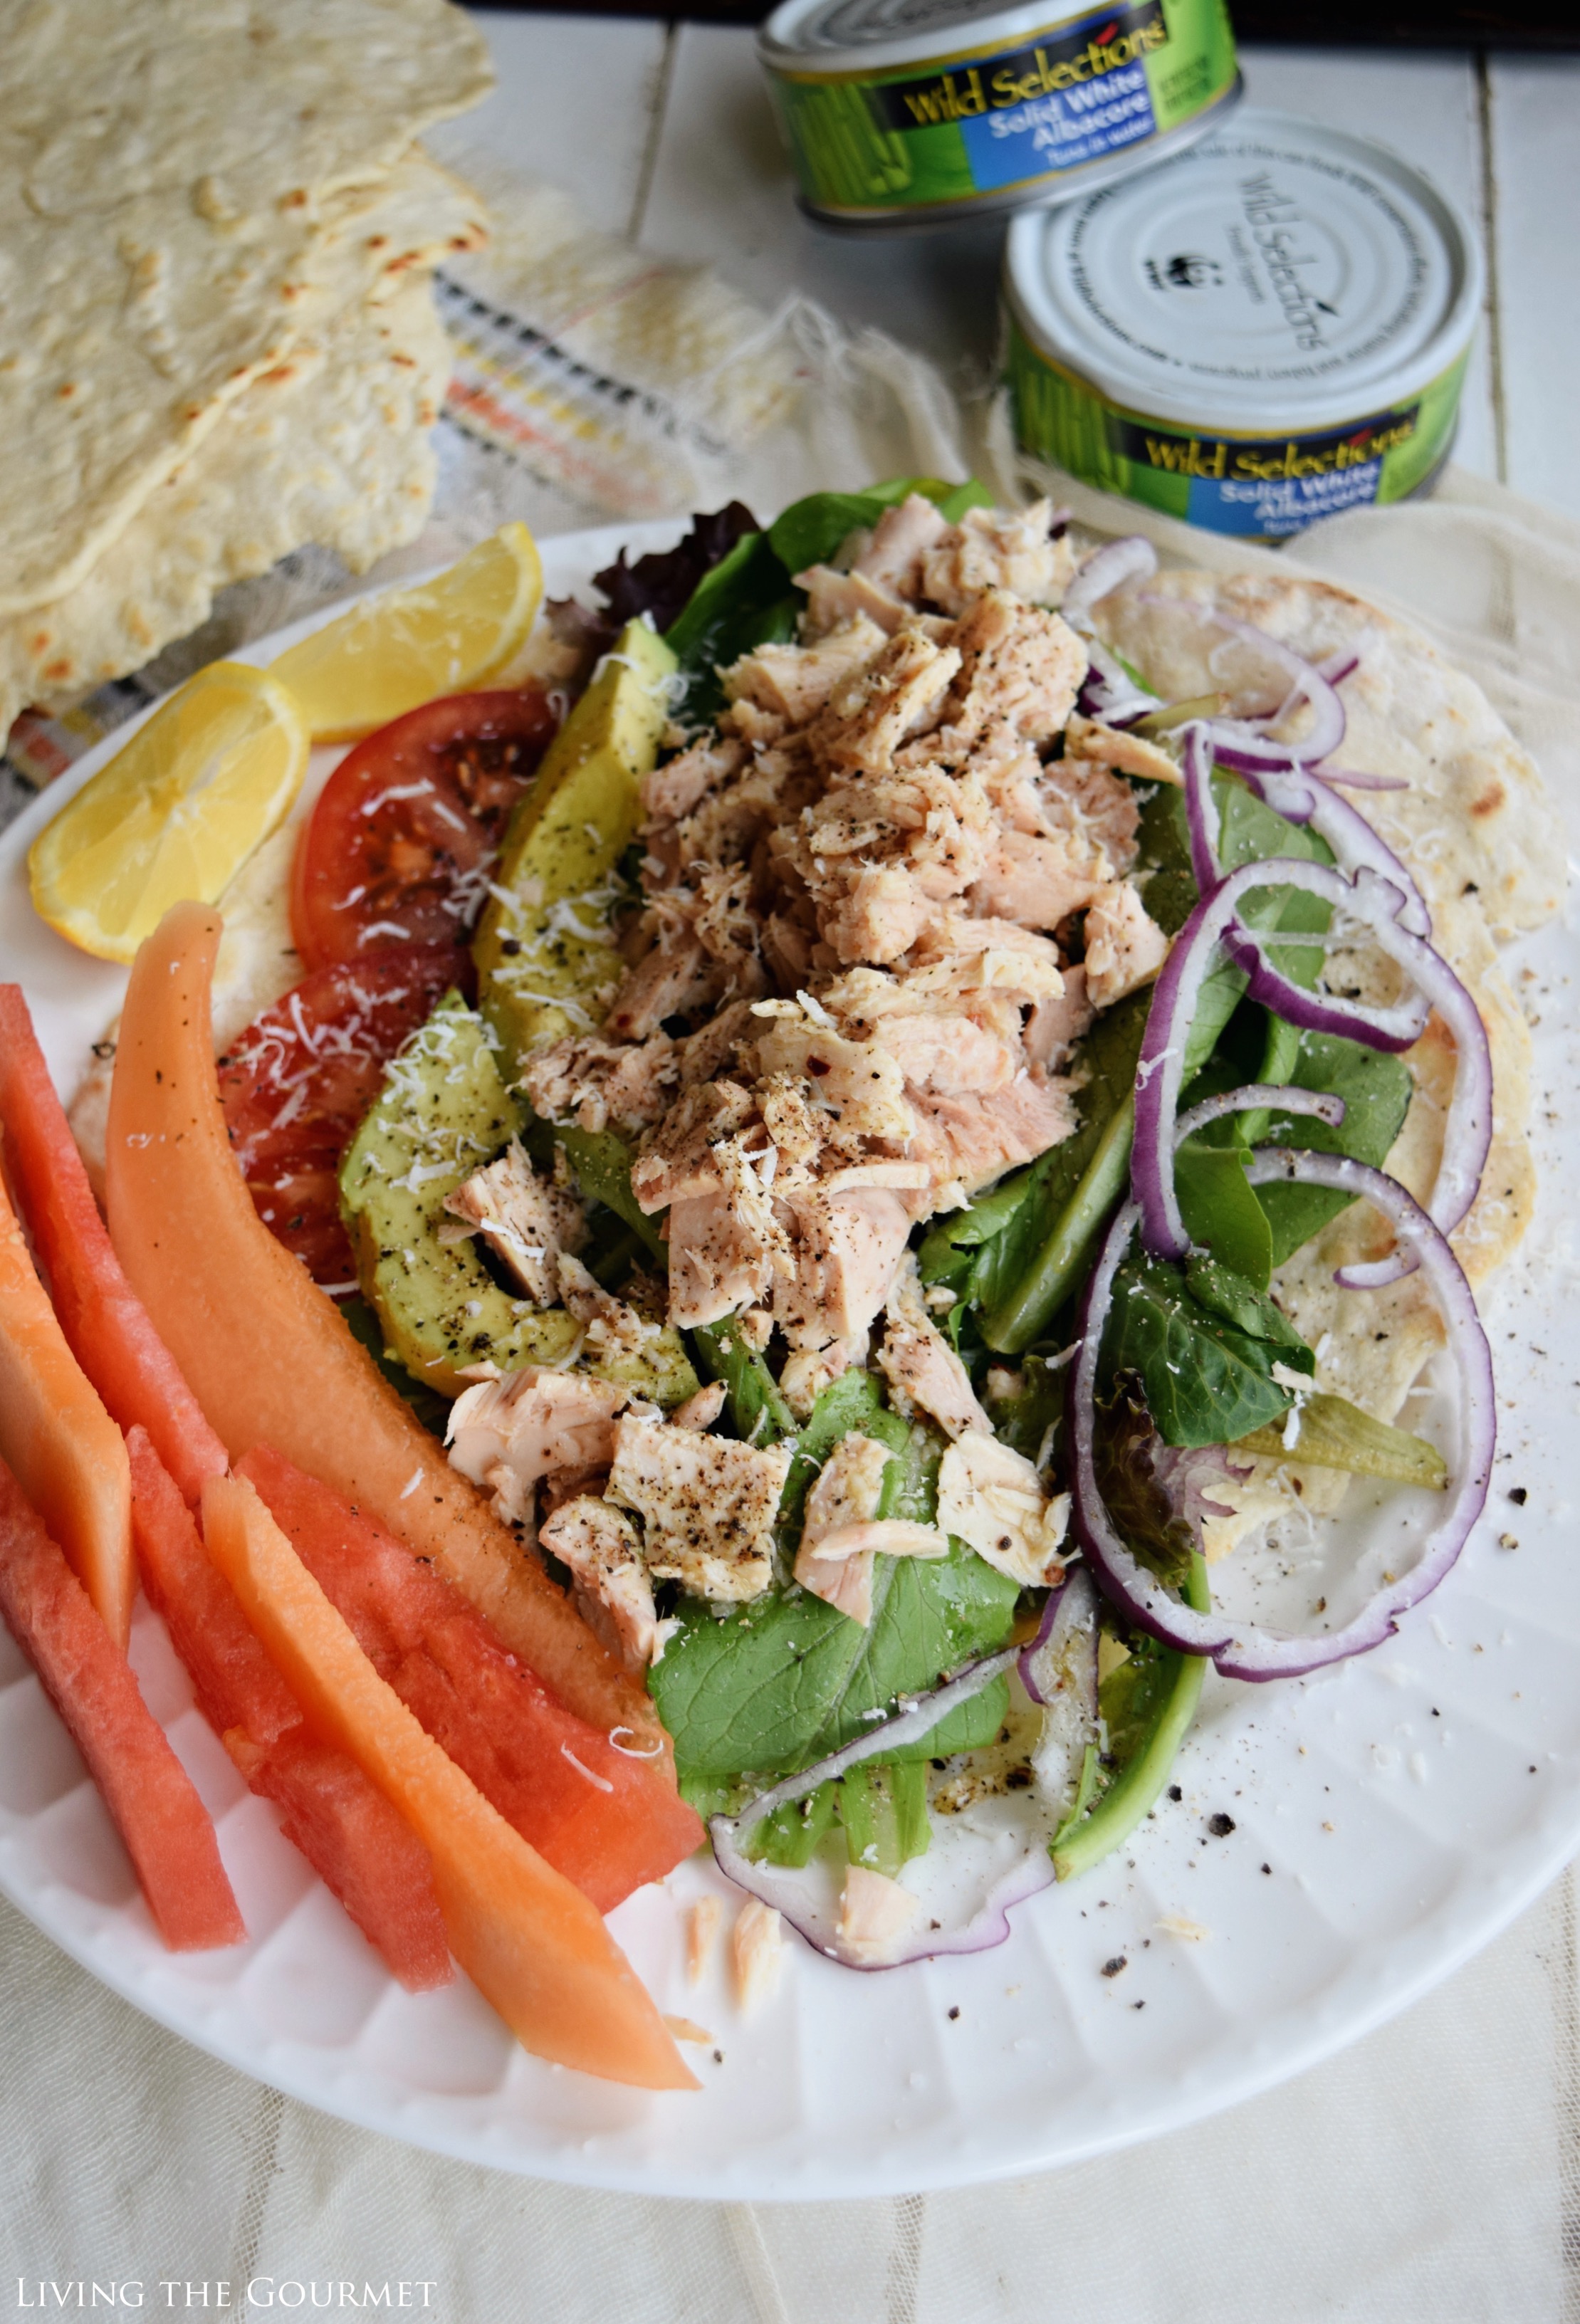 Living the Gourmet: Tuna Salad with Fresh Flatbreads | #WildSelections #sponsored